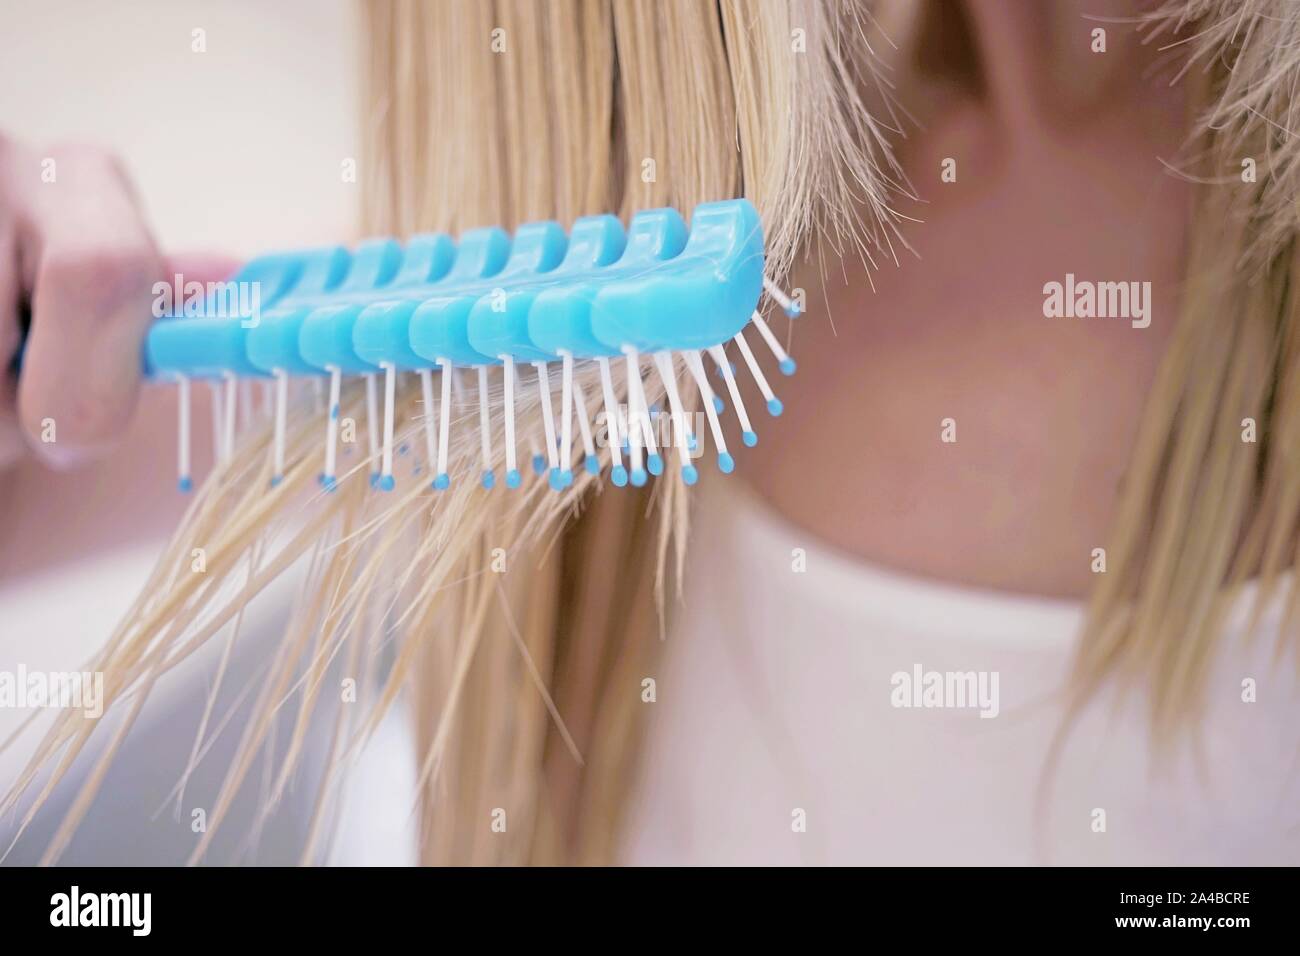 young girl combing her wet blond hair with a blue comb, close-up. Stock Photo